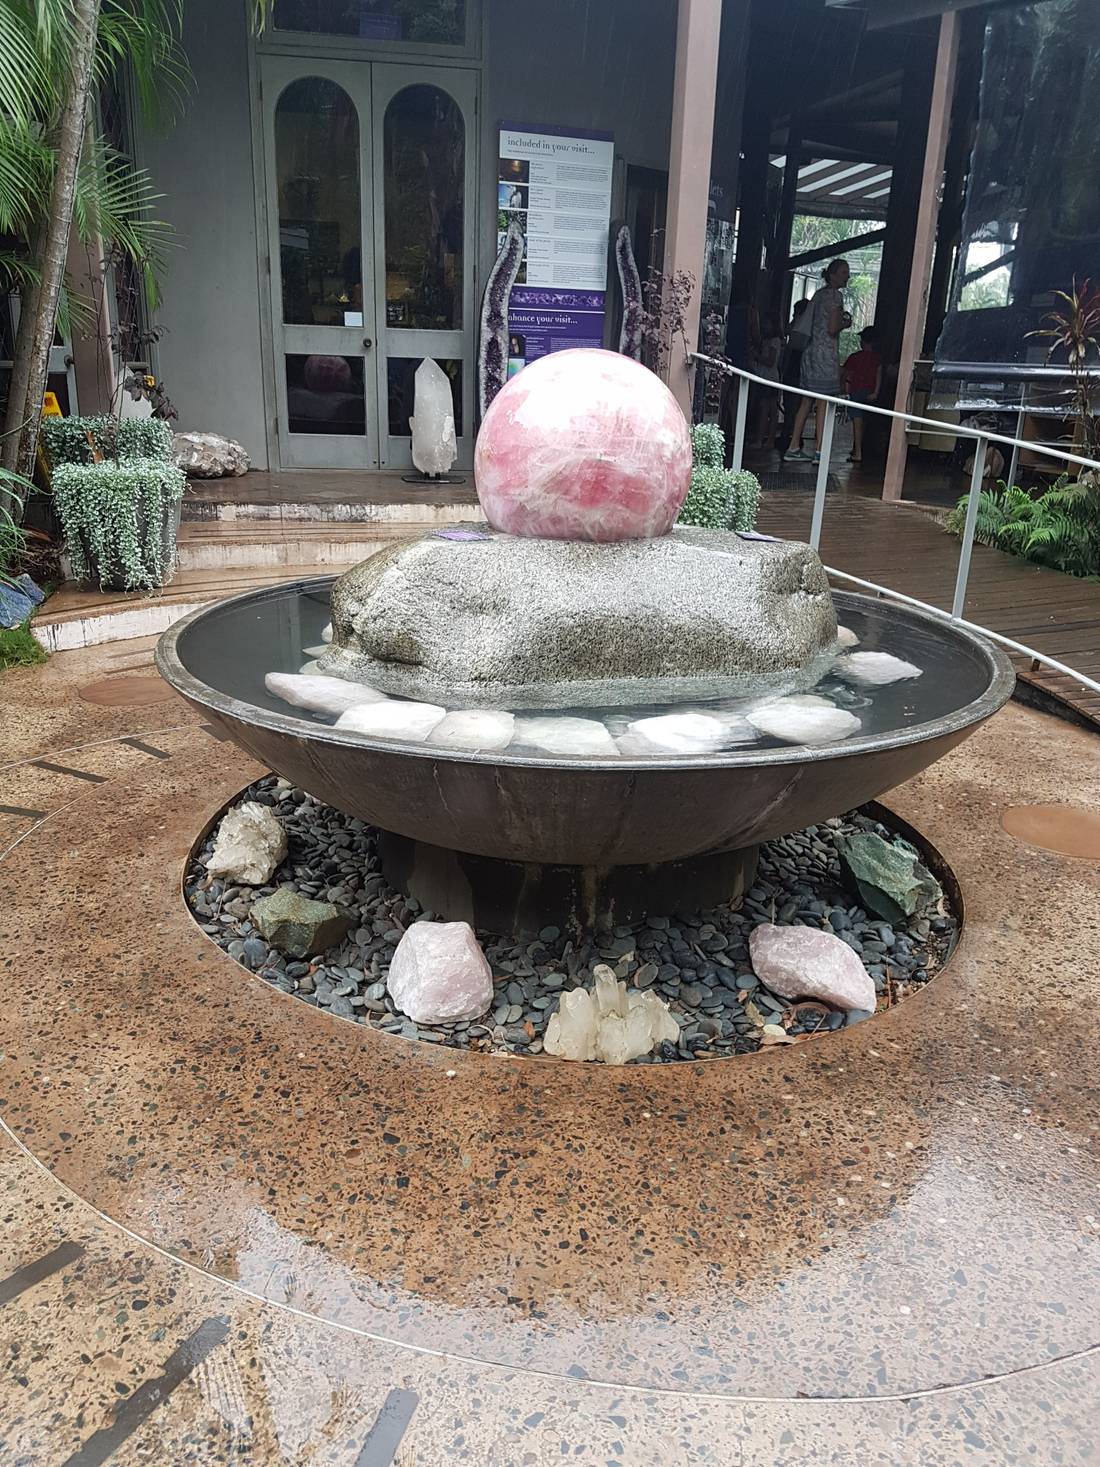 The rose quarts sphere was floating and spinning on the fountain.